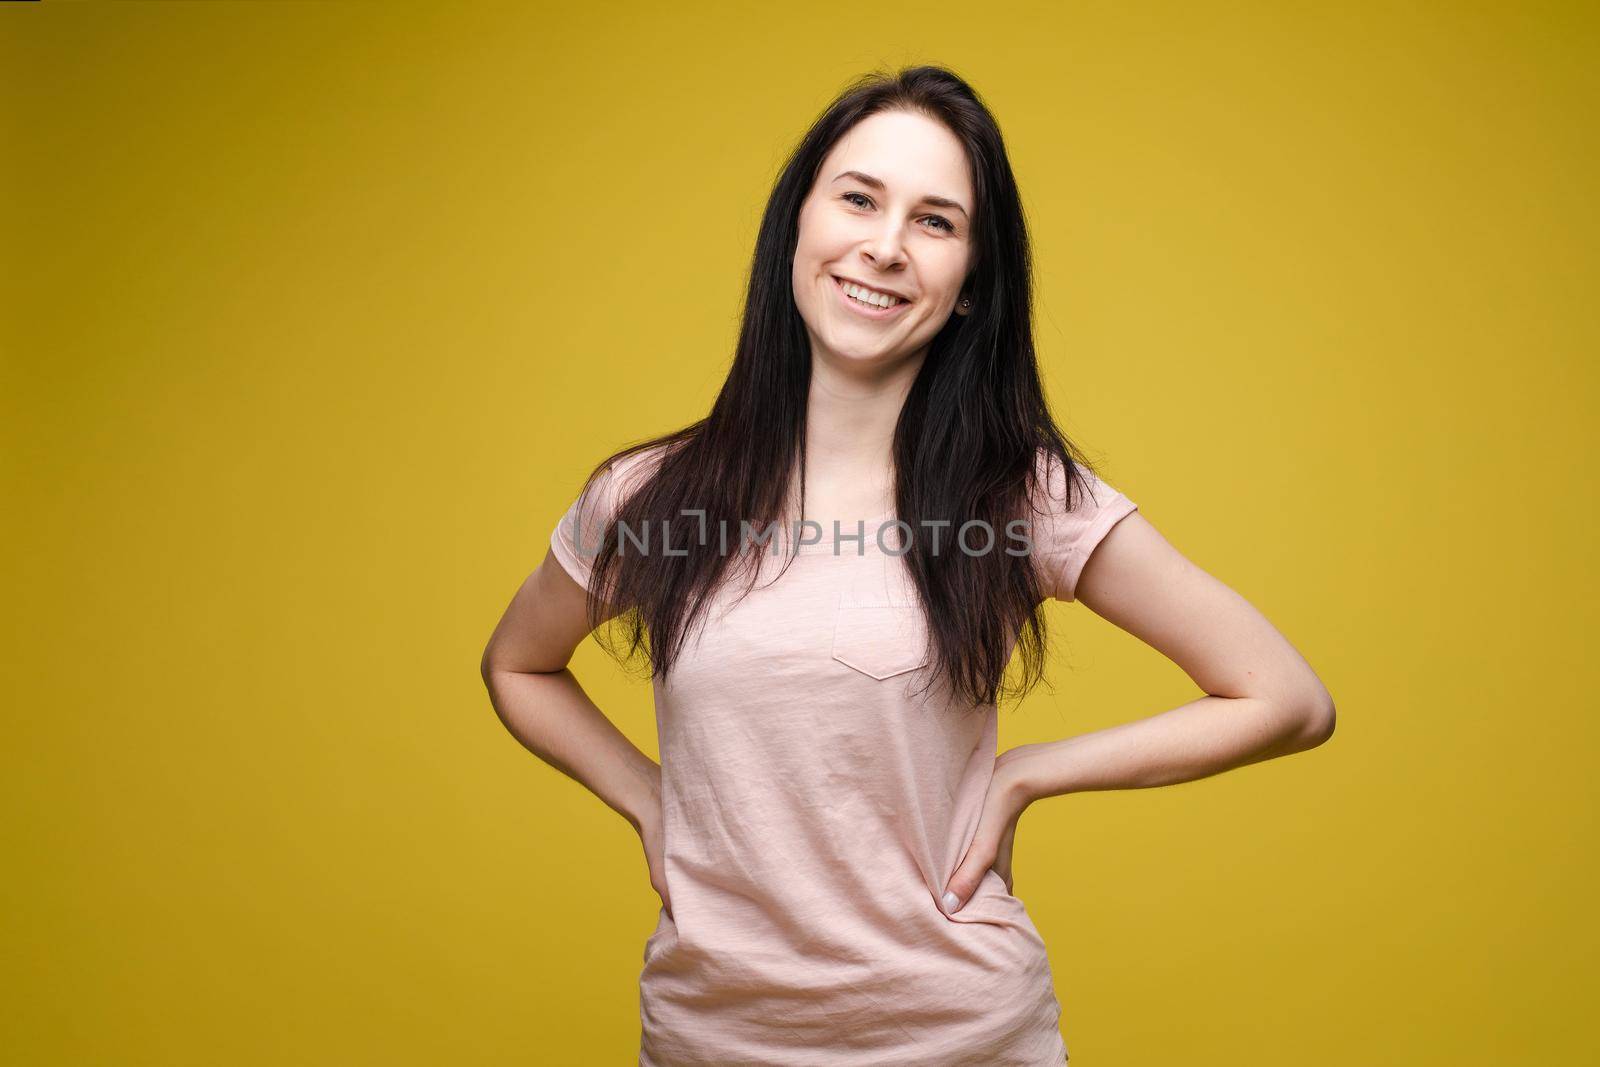 Slim woman wearing white shirt and jeans standing steady by StudioLucky